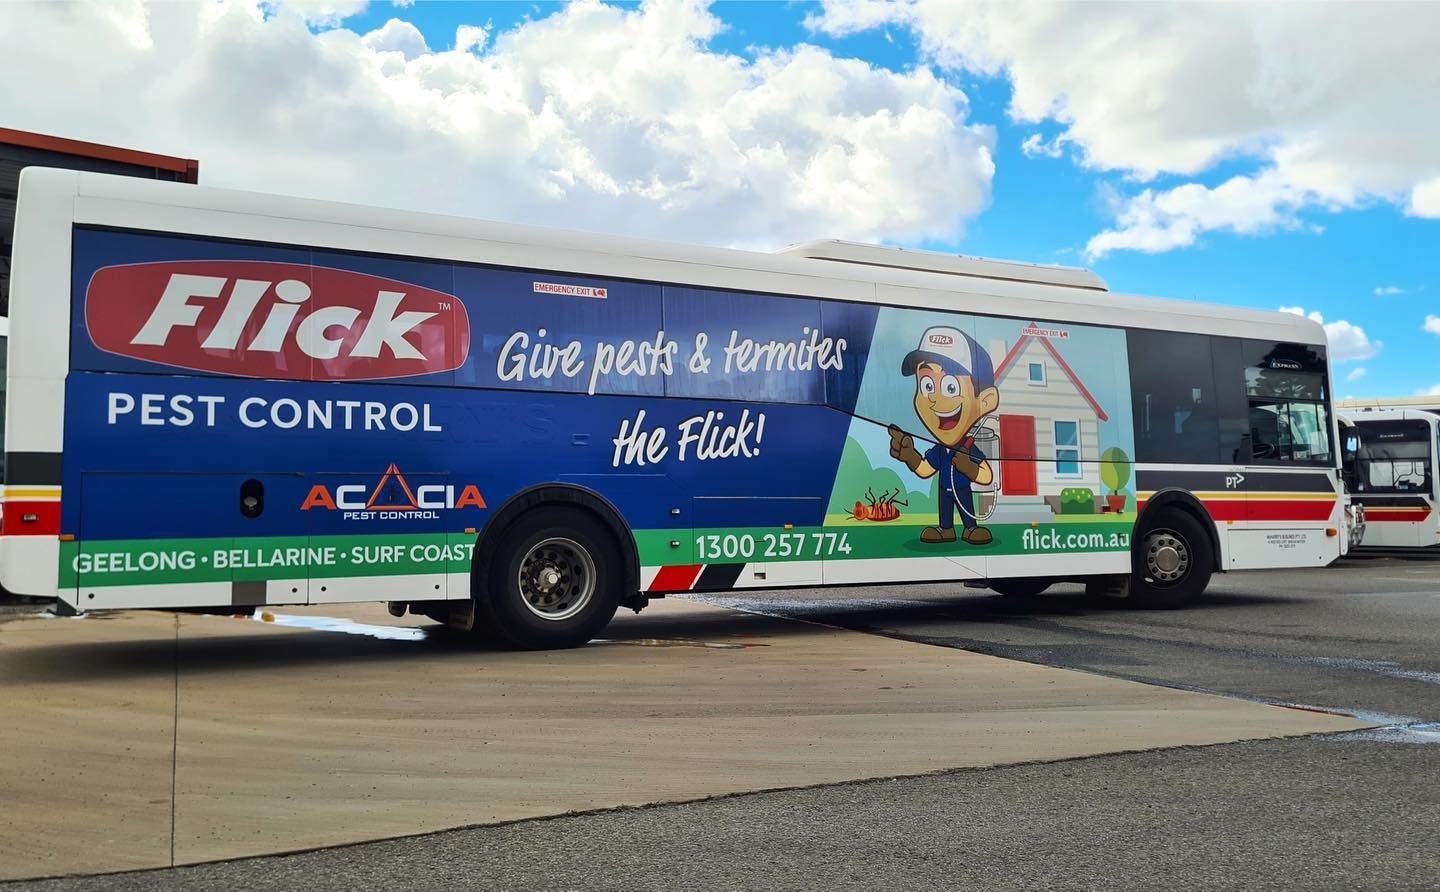 Give pests and termites the Flick! @flickpestcontrol